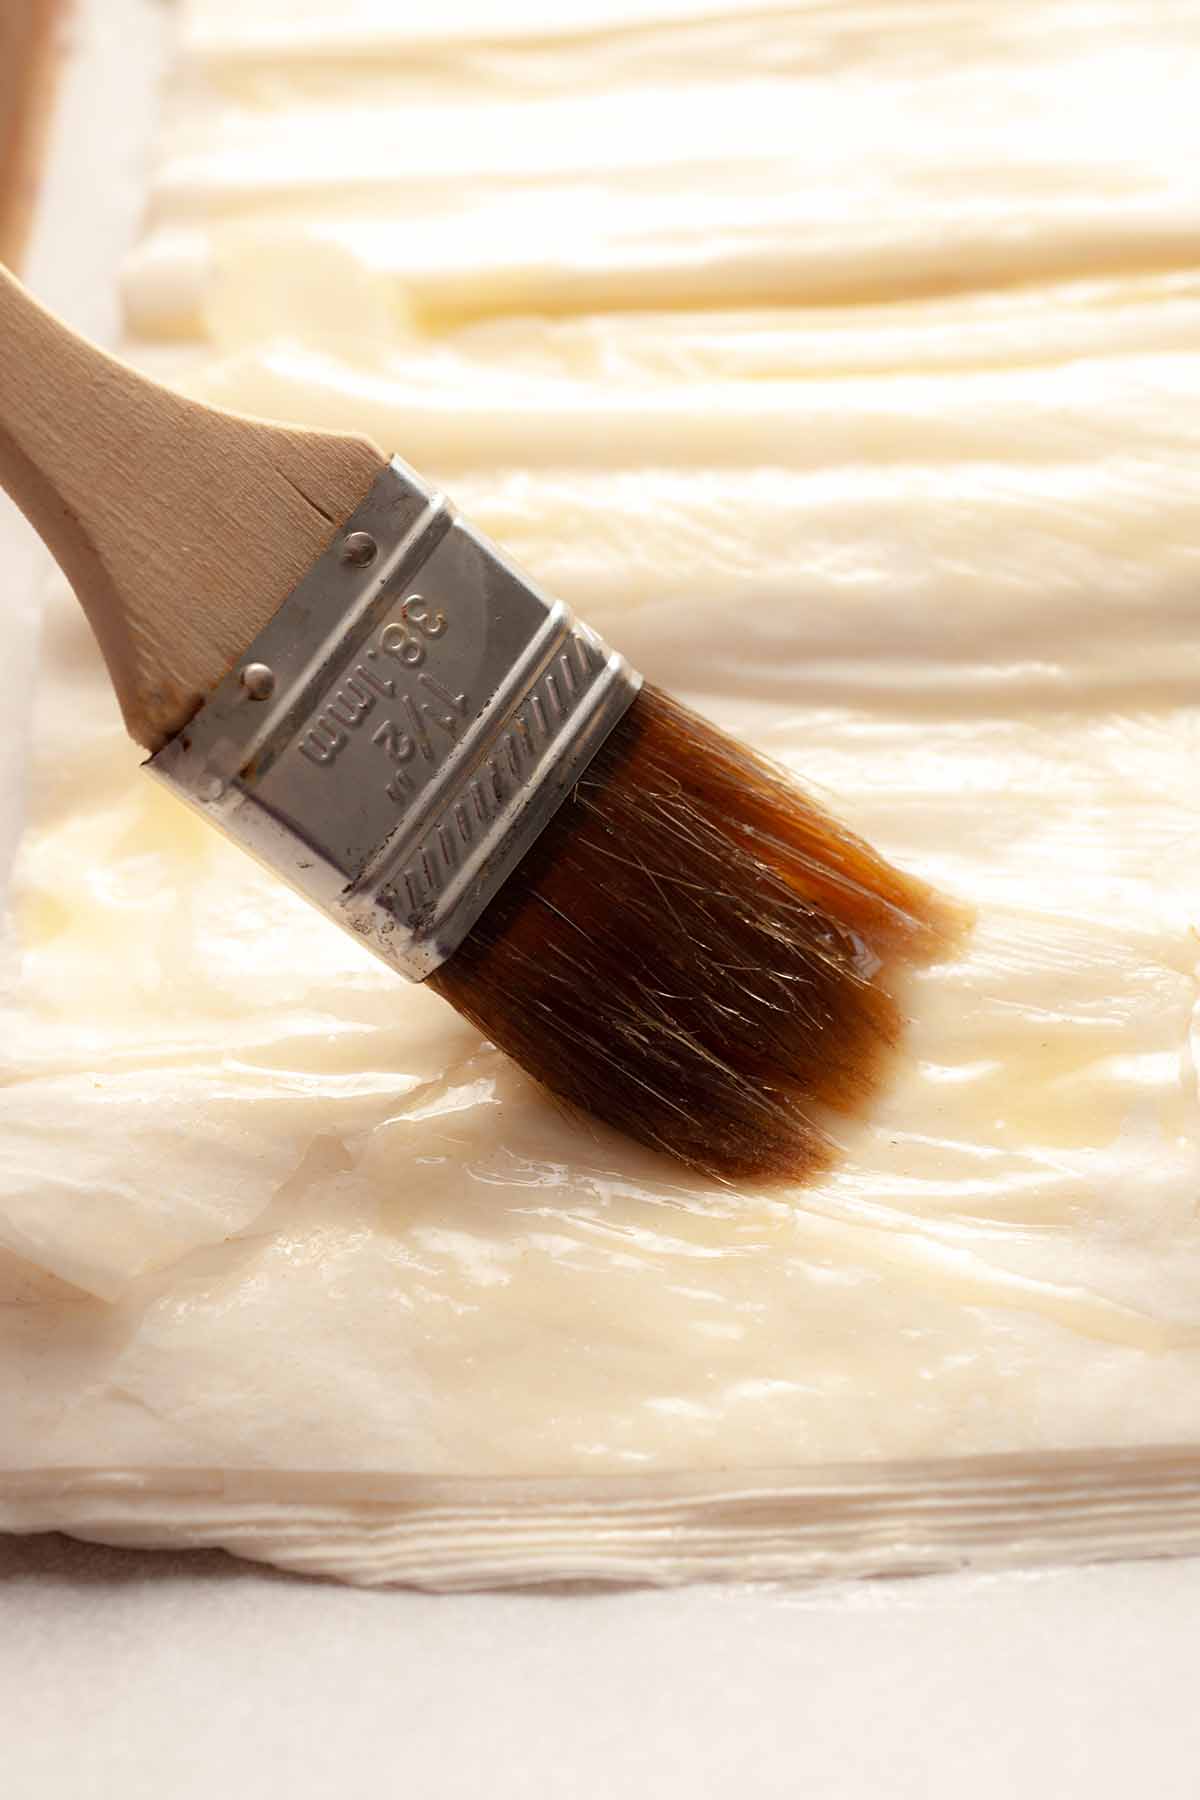 Use pastry brush on phyllo dough